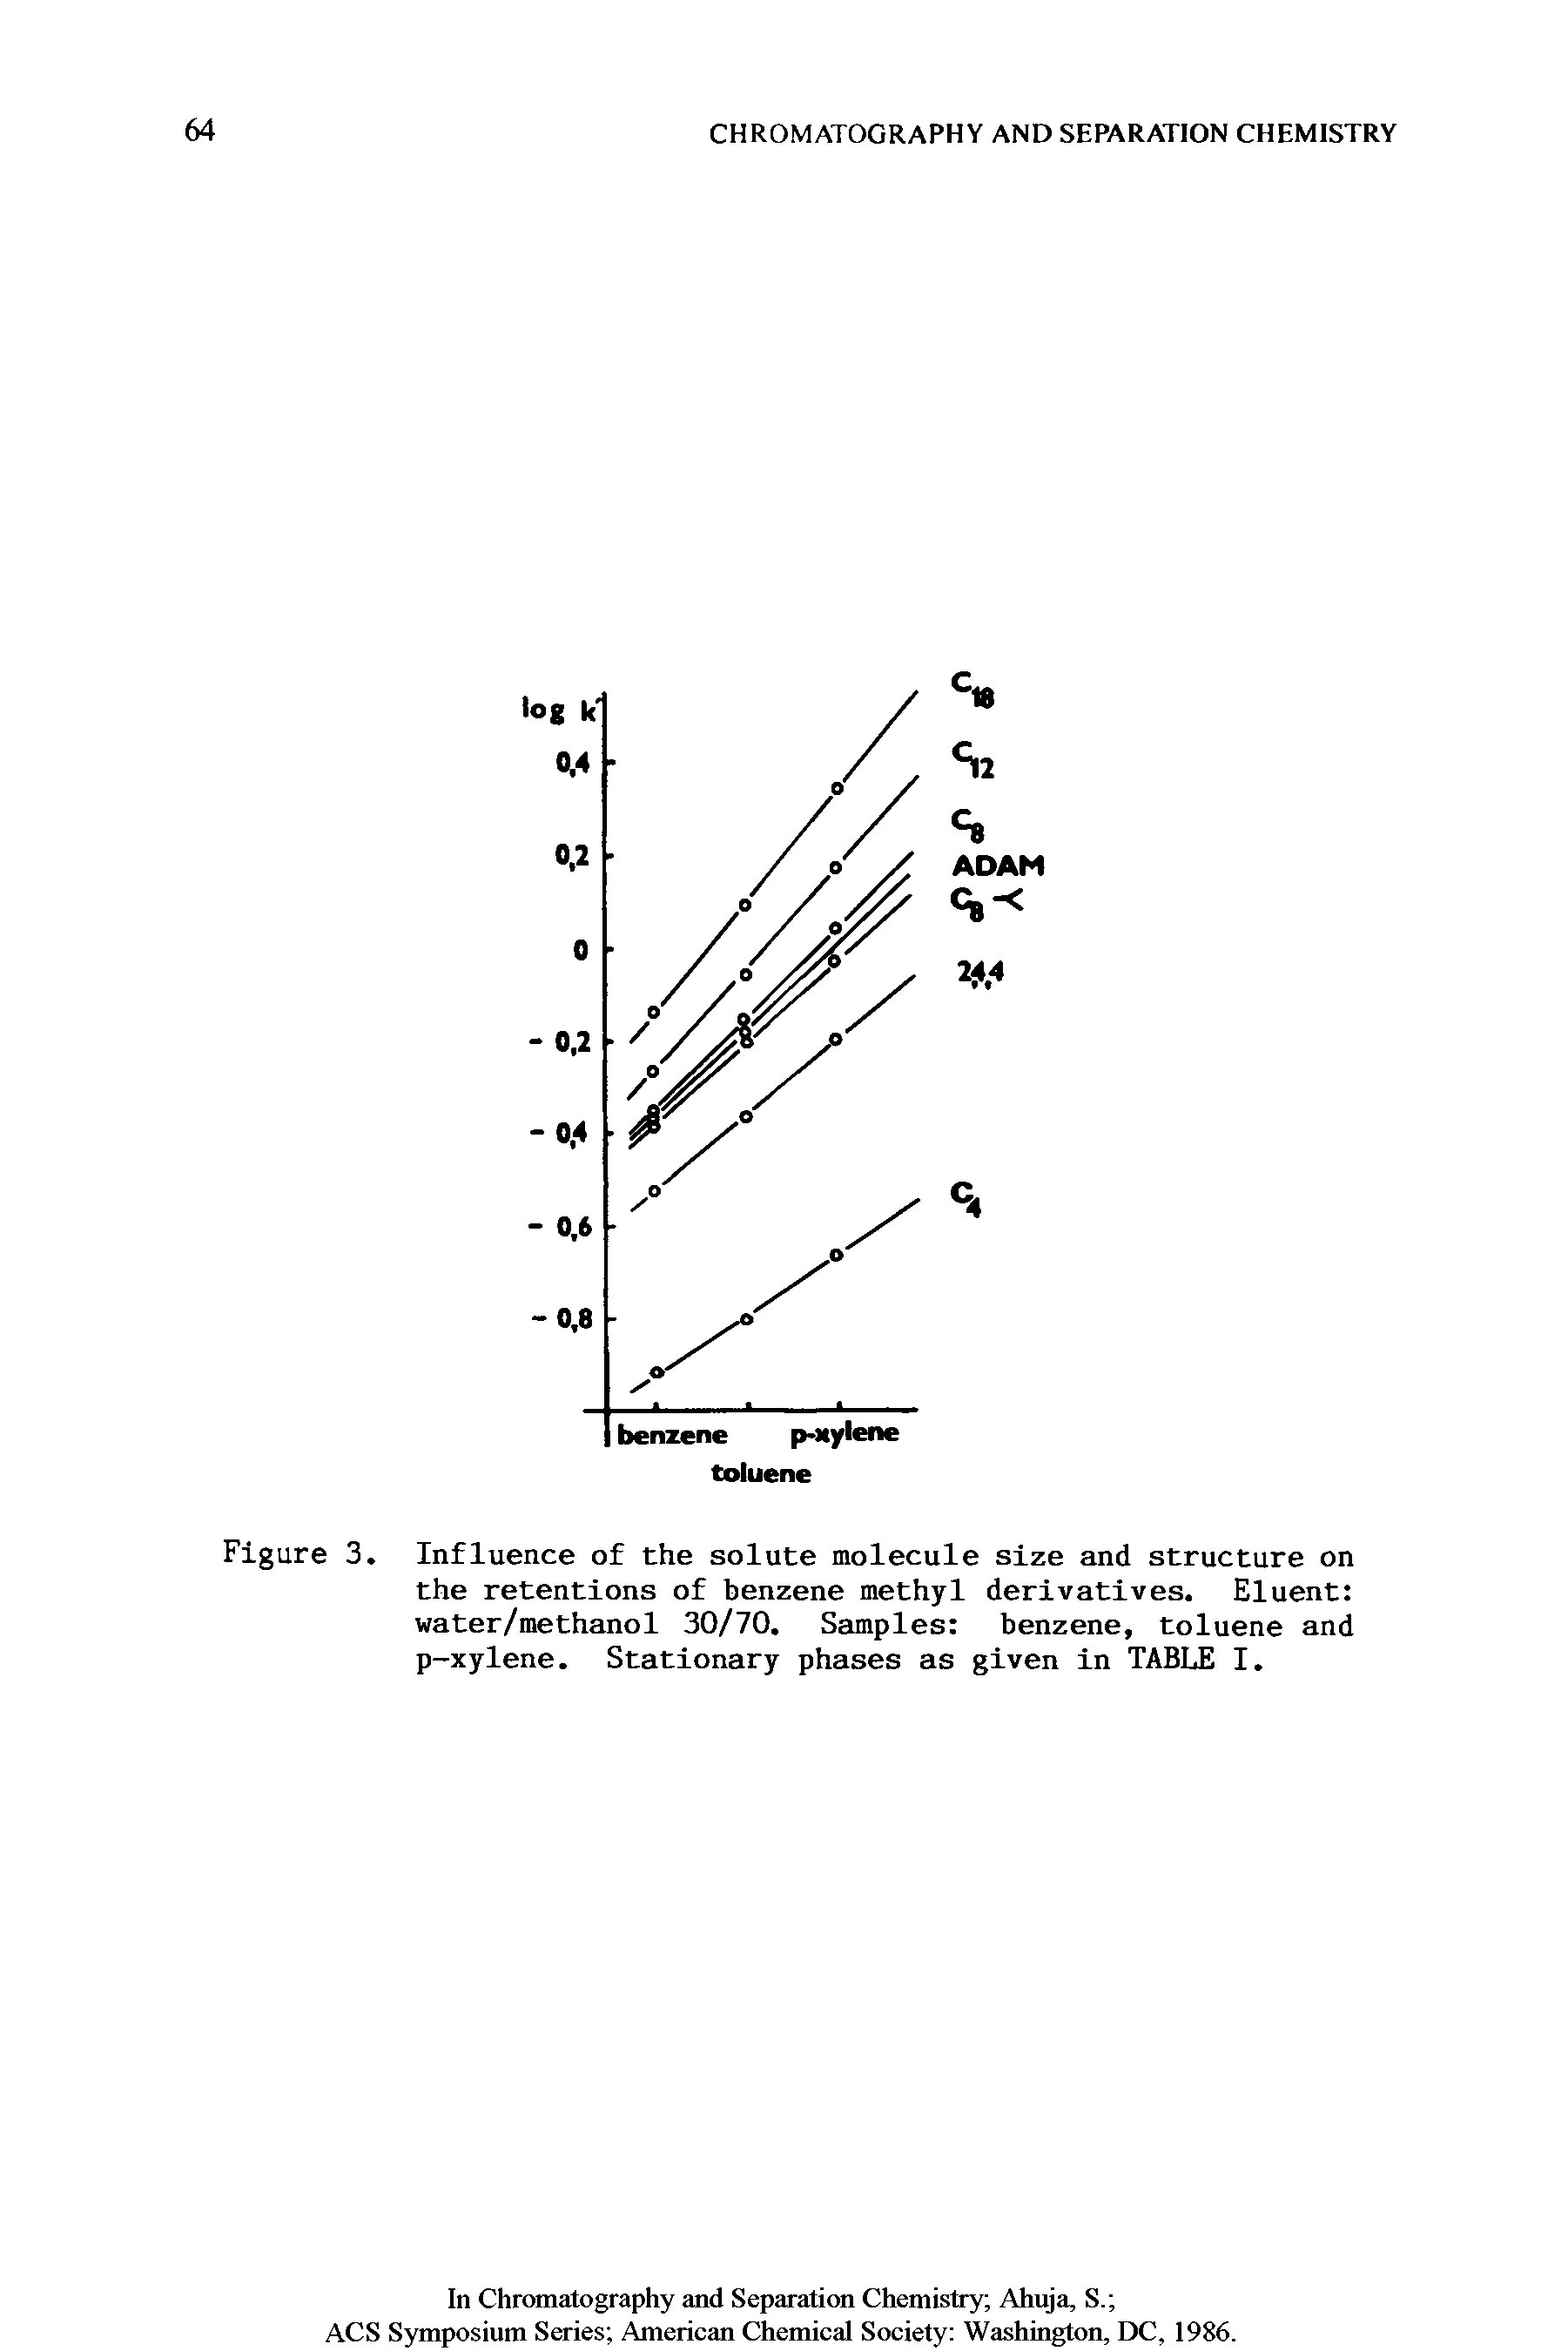 Figure 3. Influence of the solute molecule size and structure on the retentions of benzene methyl derivatives. Eluent water/methanol 30/70, Samples benzene, toluene and p-xylene. Stationary phases as given in TABLE I.